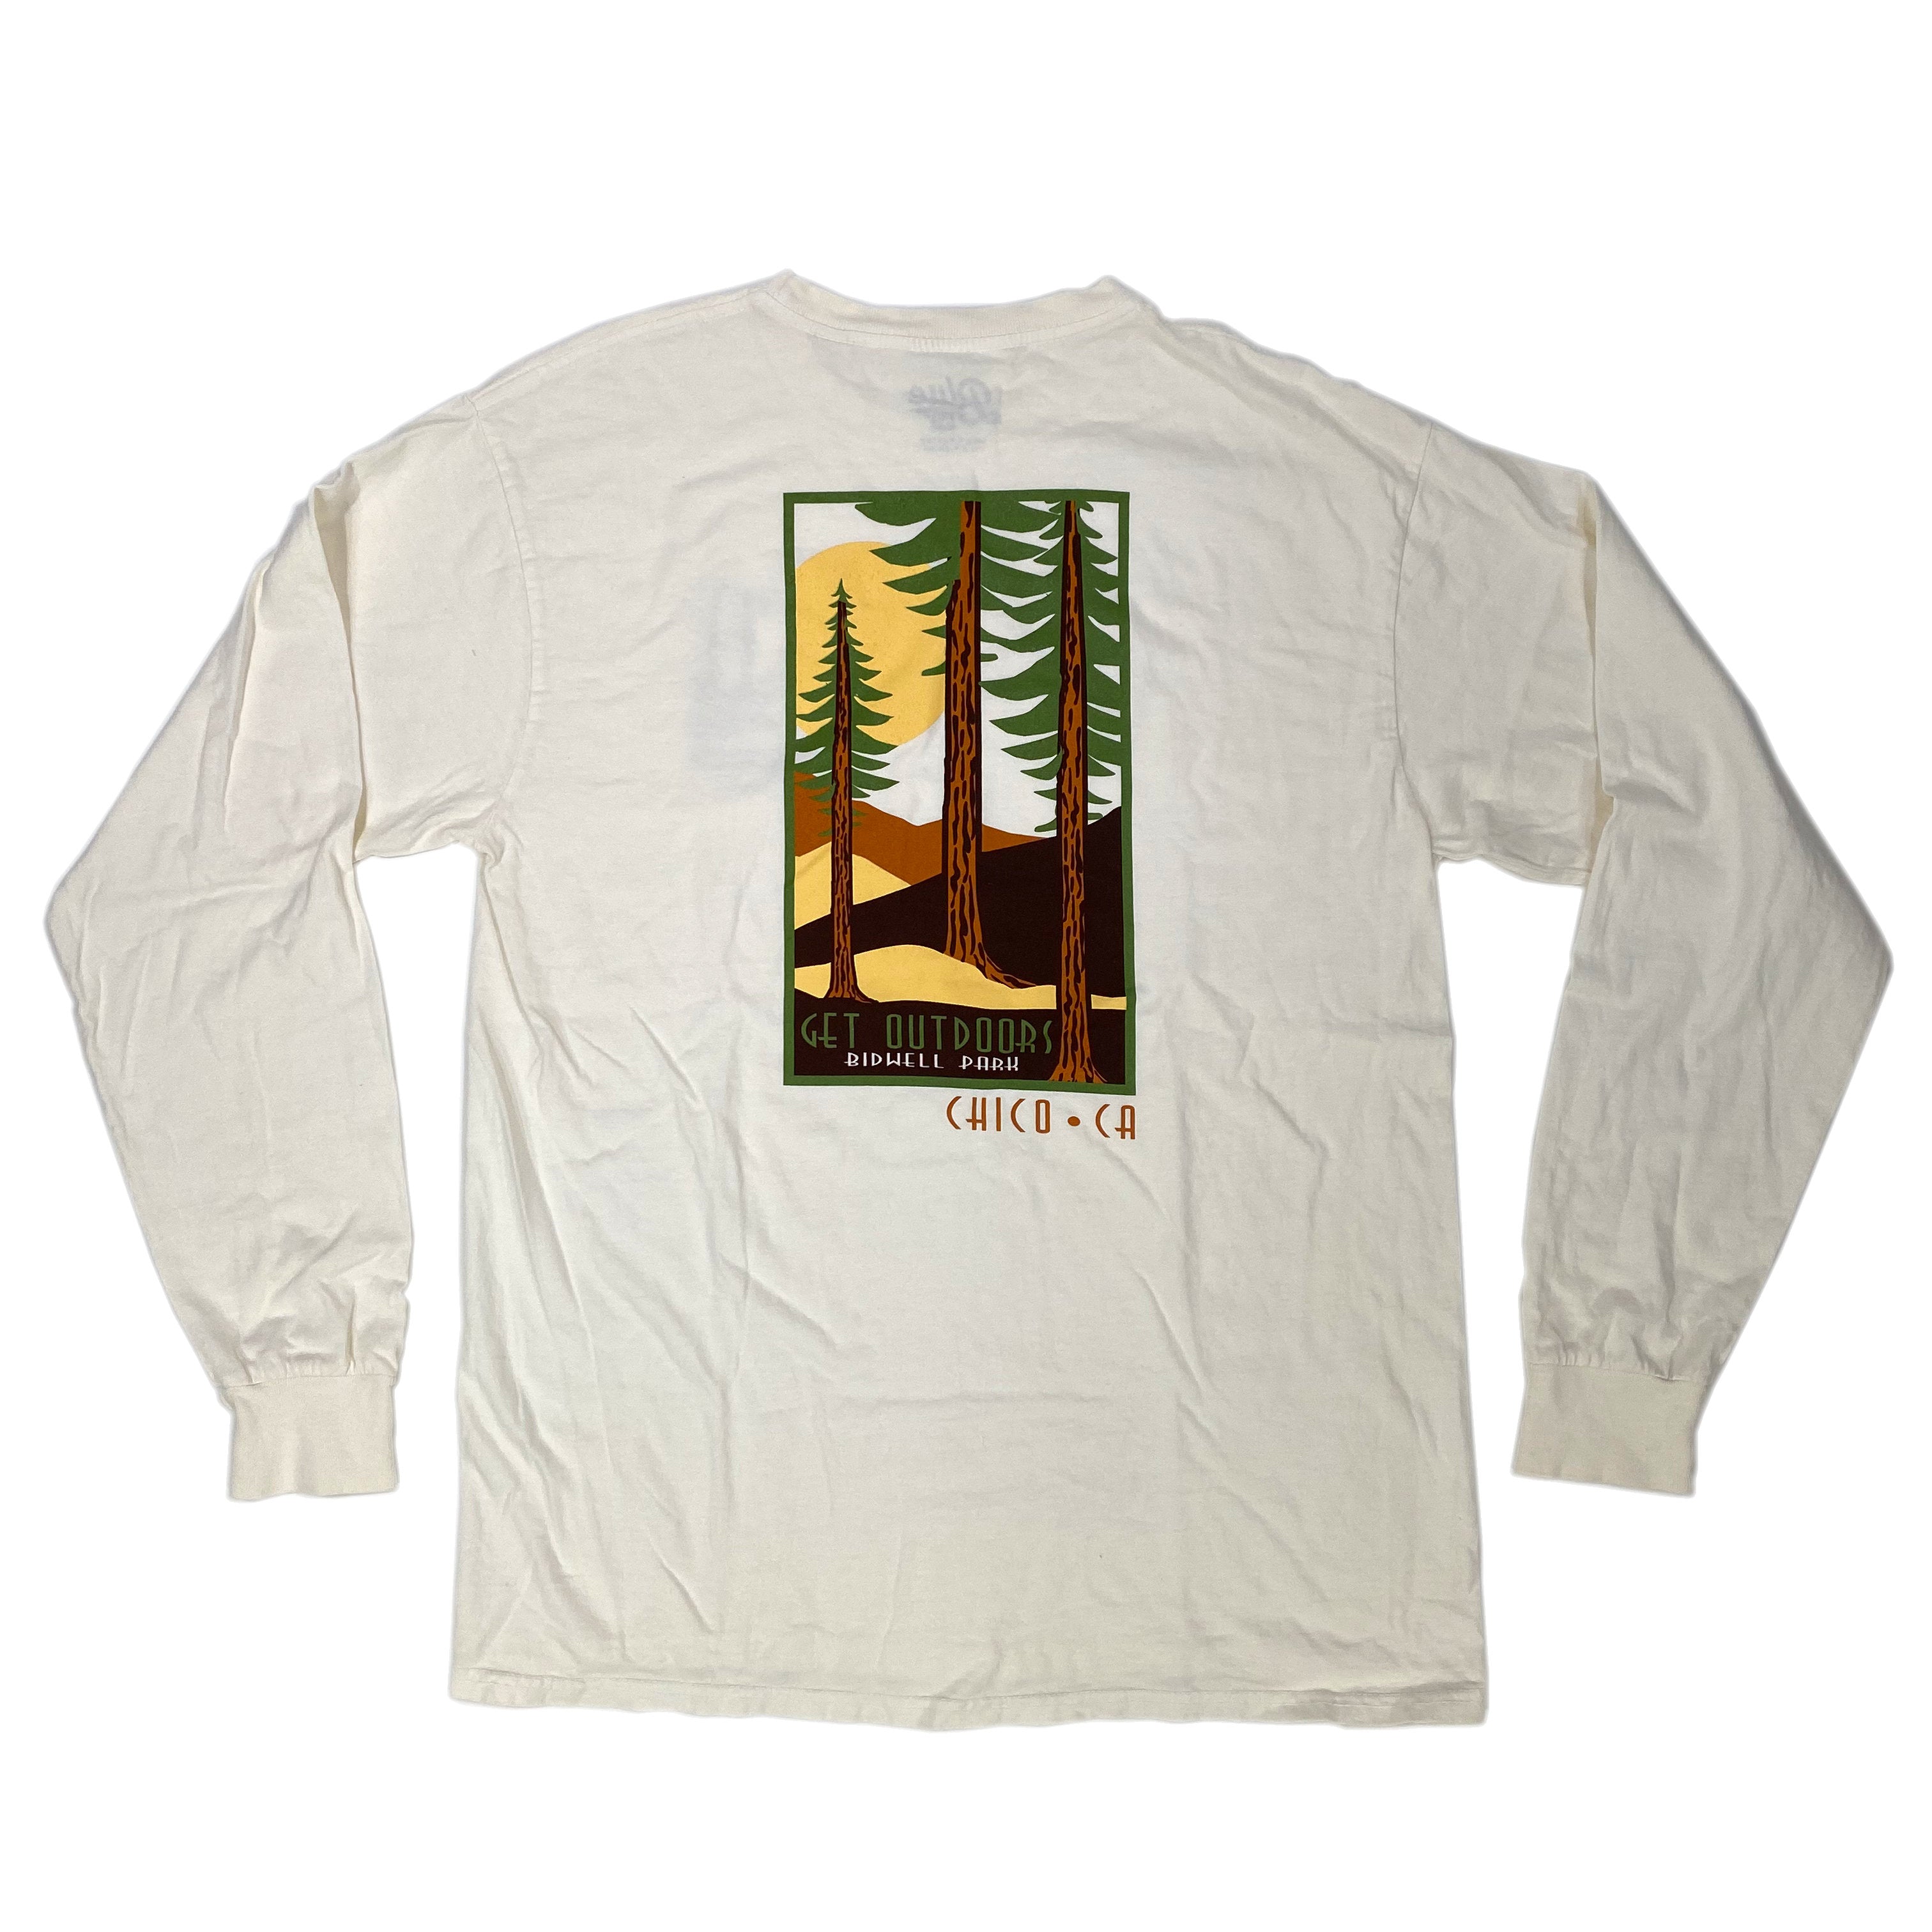 After Point Pine - Long Sleeve Chico T-Shirt    